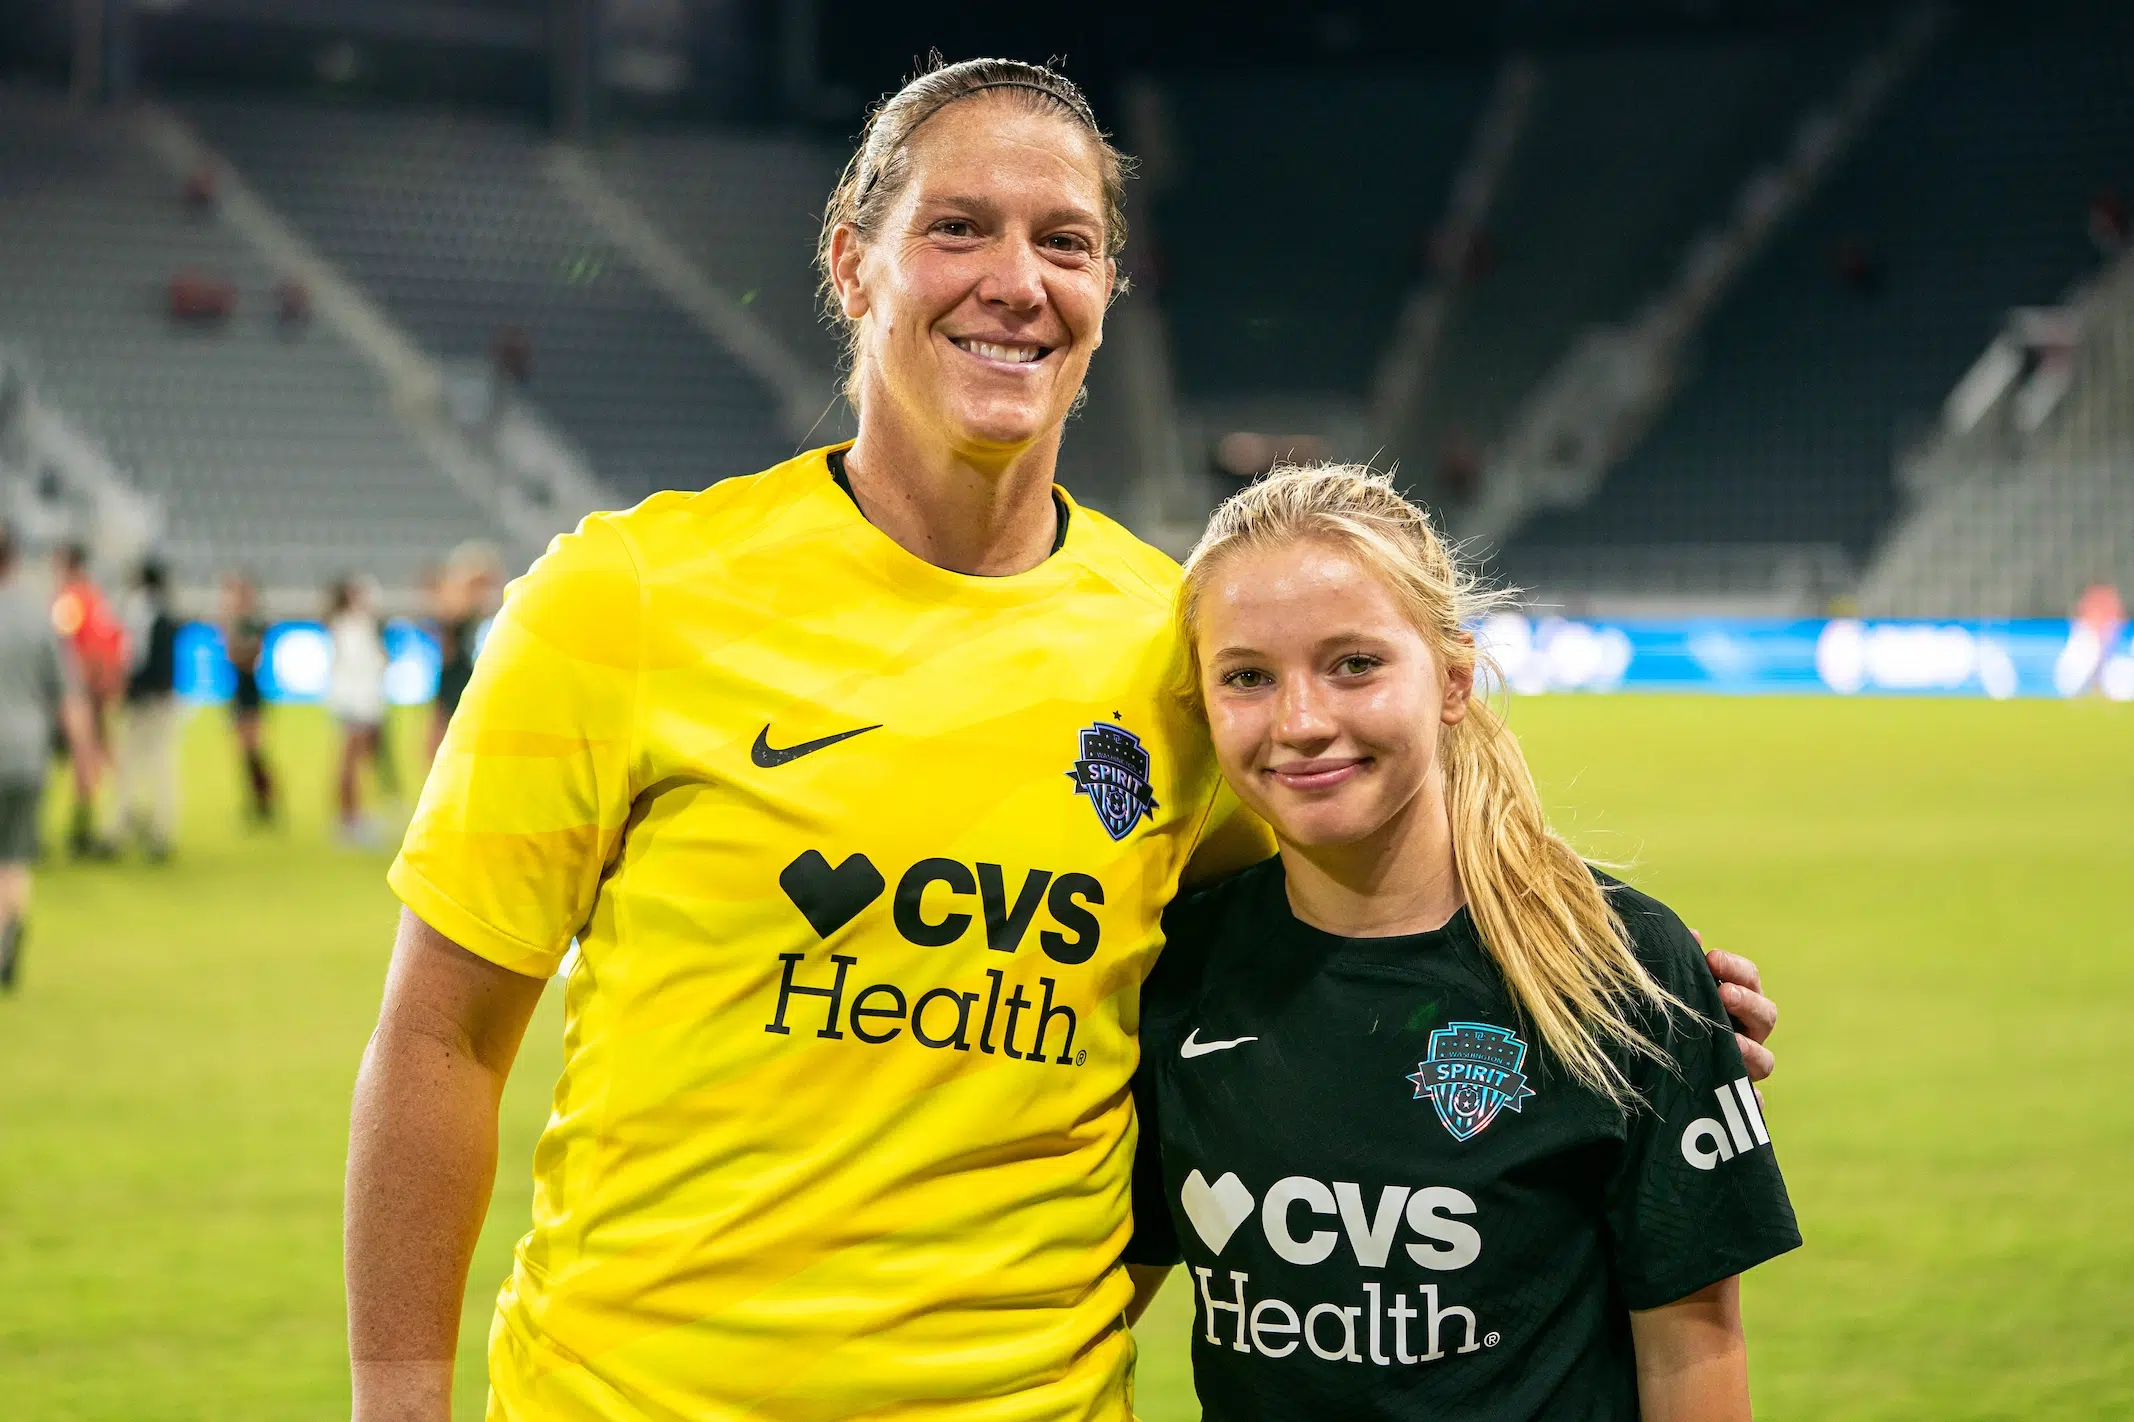 Nicole Barnhart in a yellow goalie jersey and Chloe Ricketts in a black jersey have their arms around each other and smile. Barnhart stands about a foot taller.